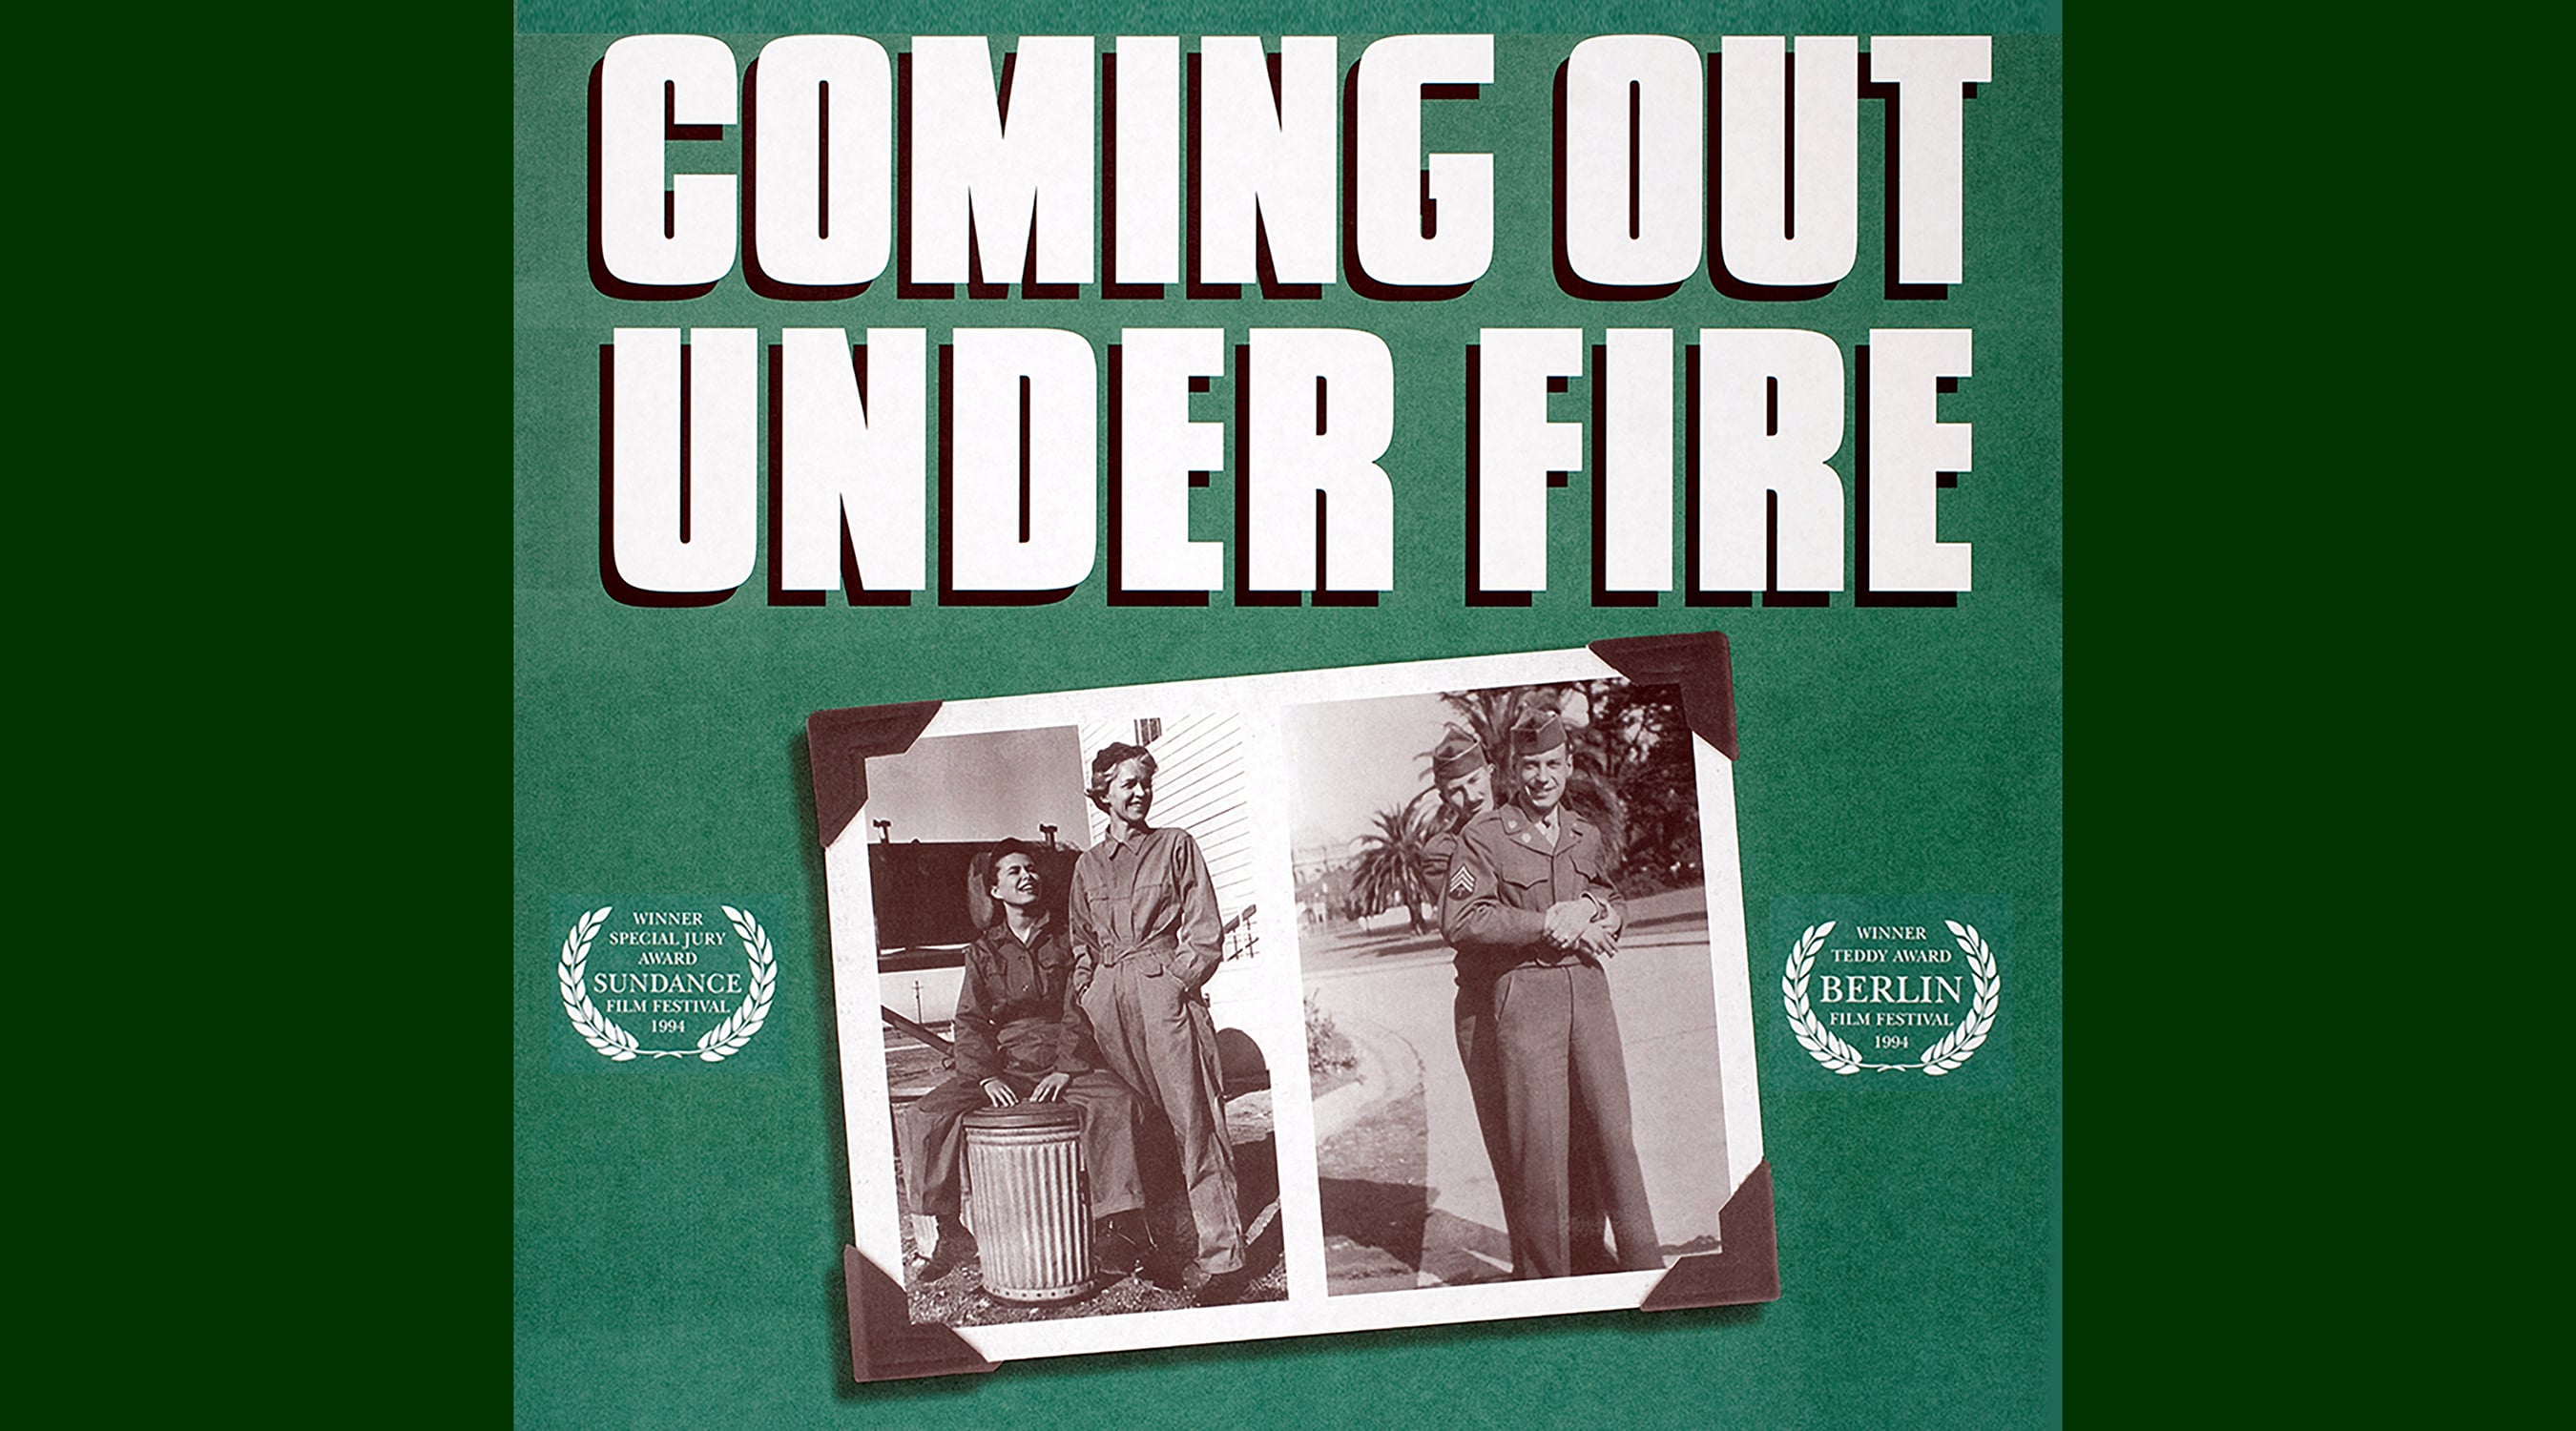 Watch Coming Out Under Fire Online Vimeo On Demand on Vimeo